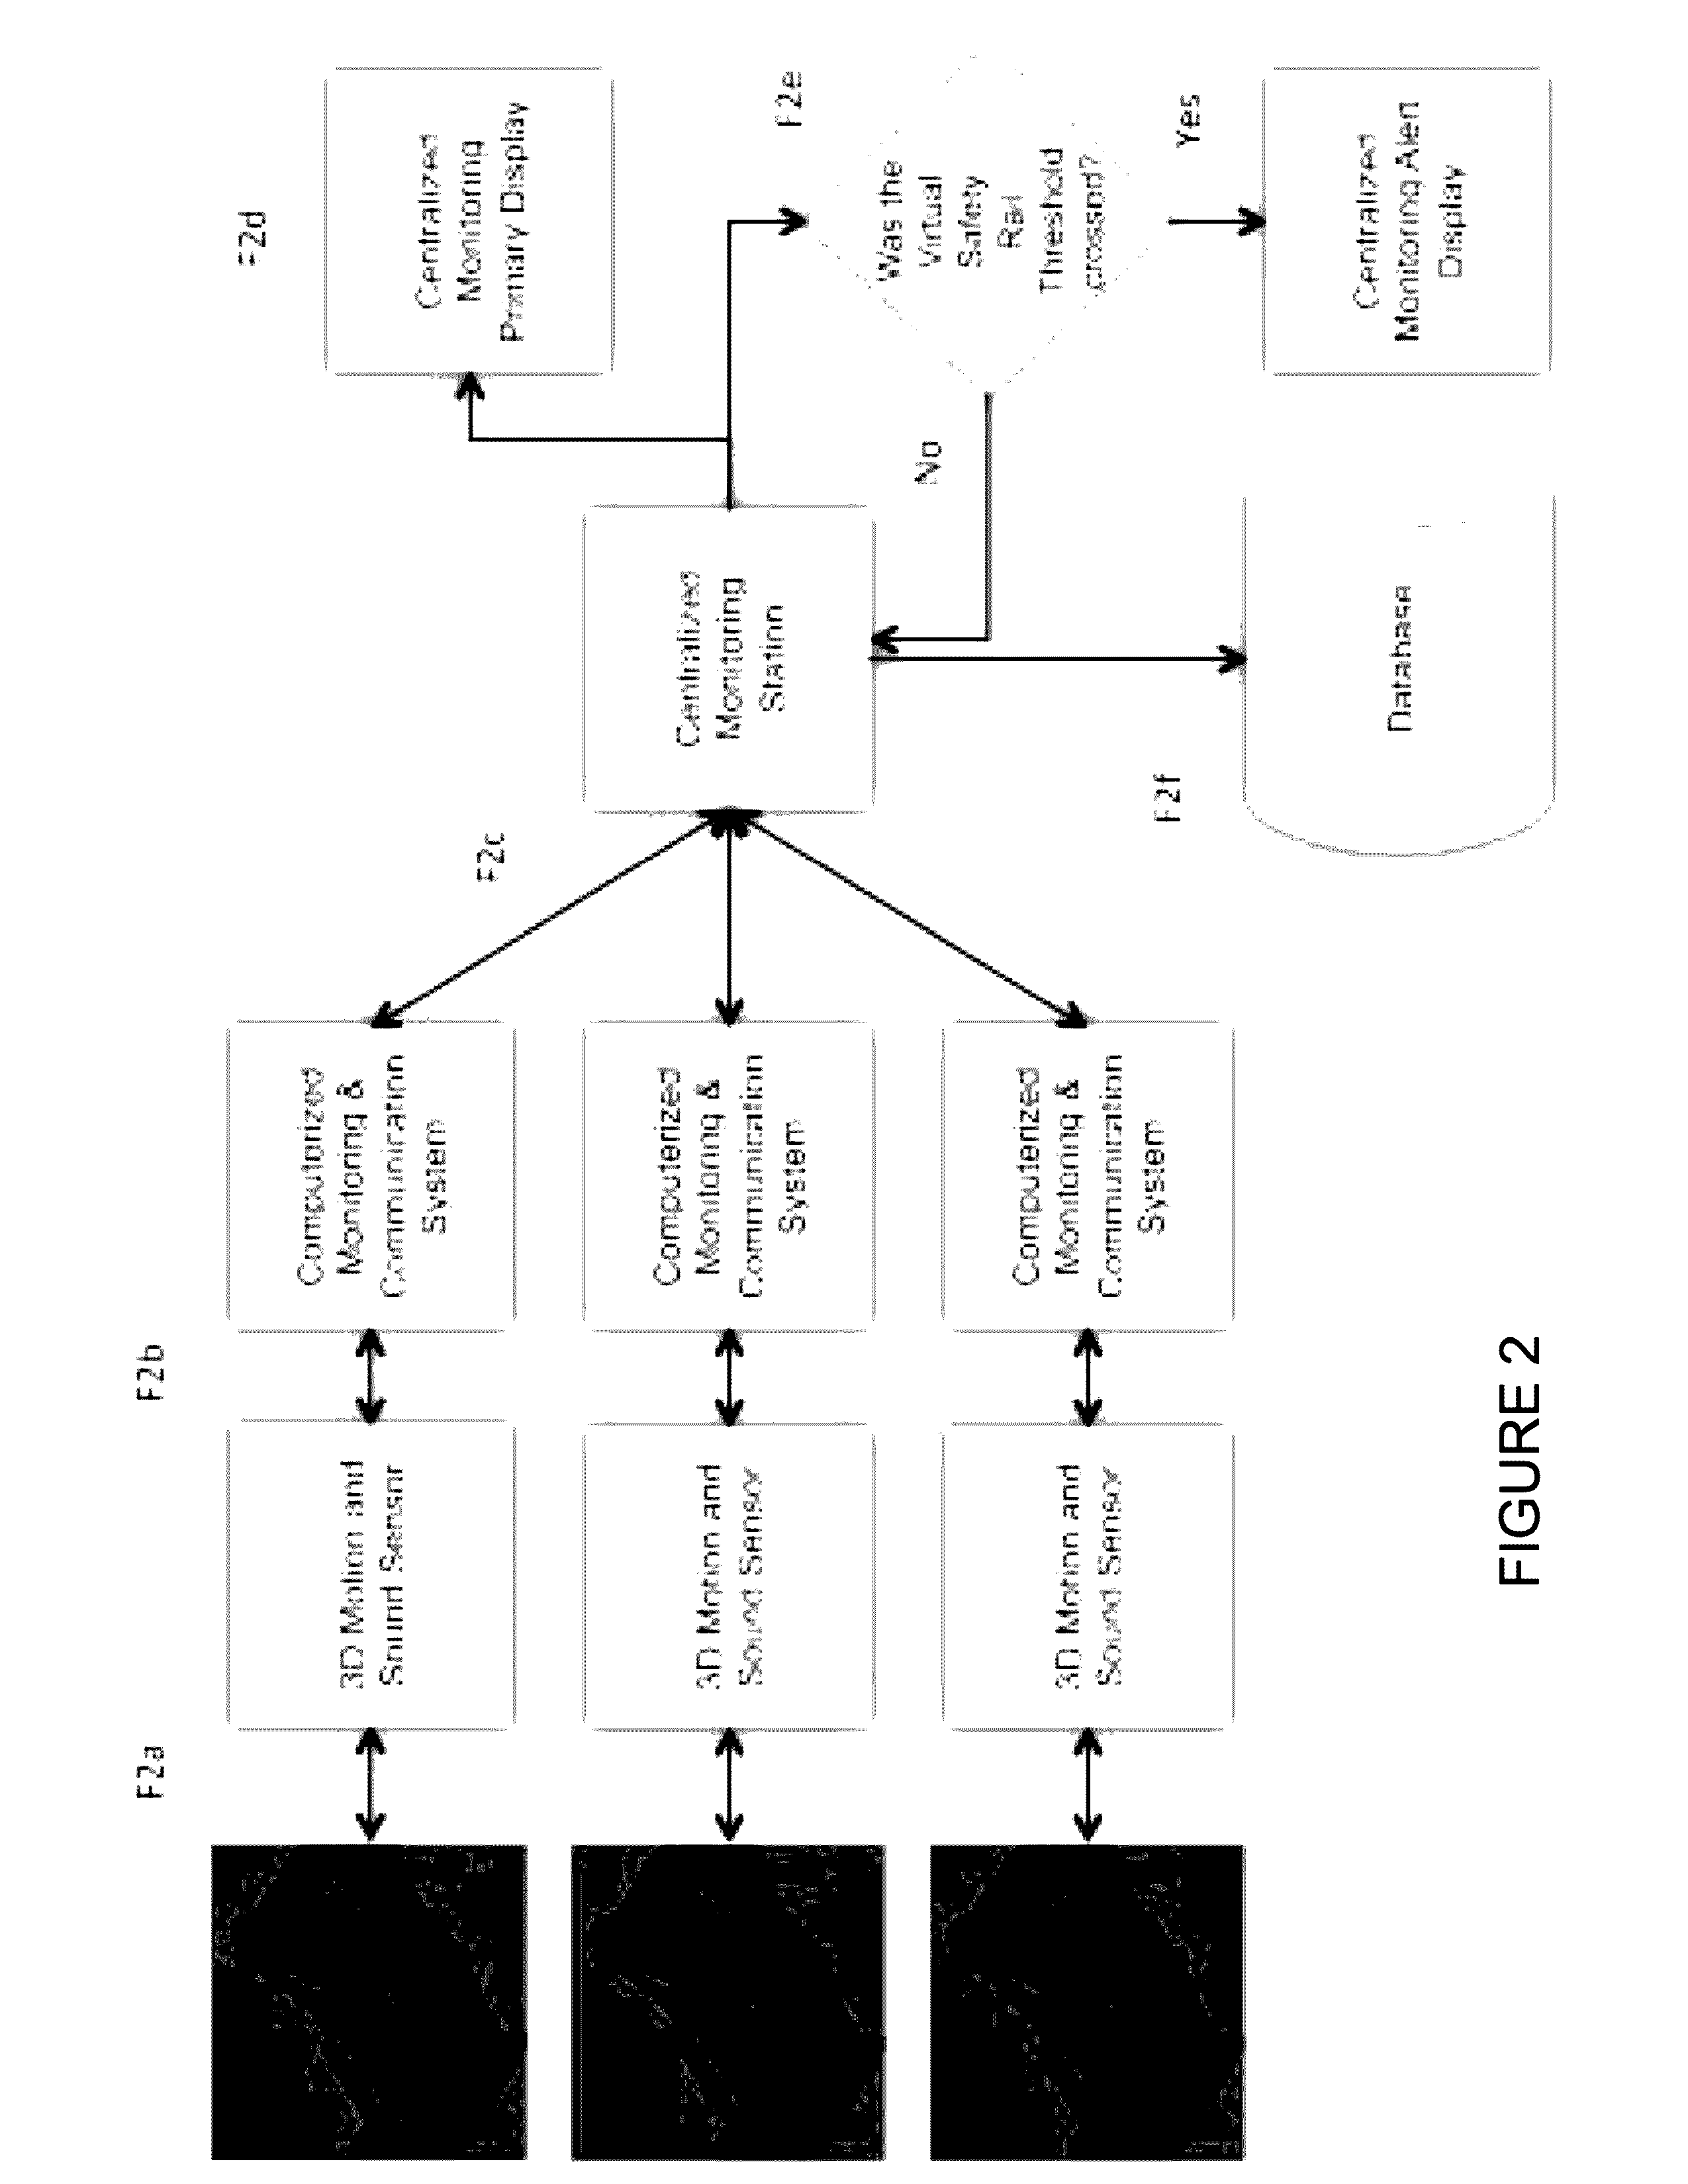 Method for determining whether an individual leaves a prescribed virtual perimeter